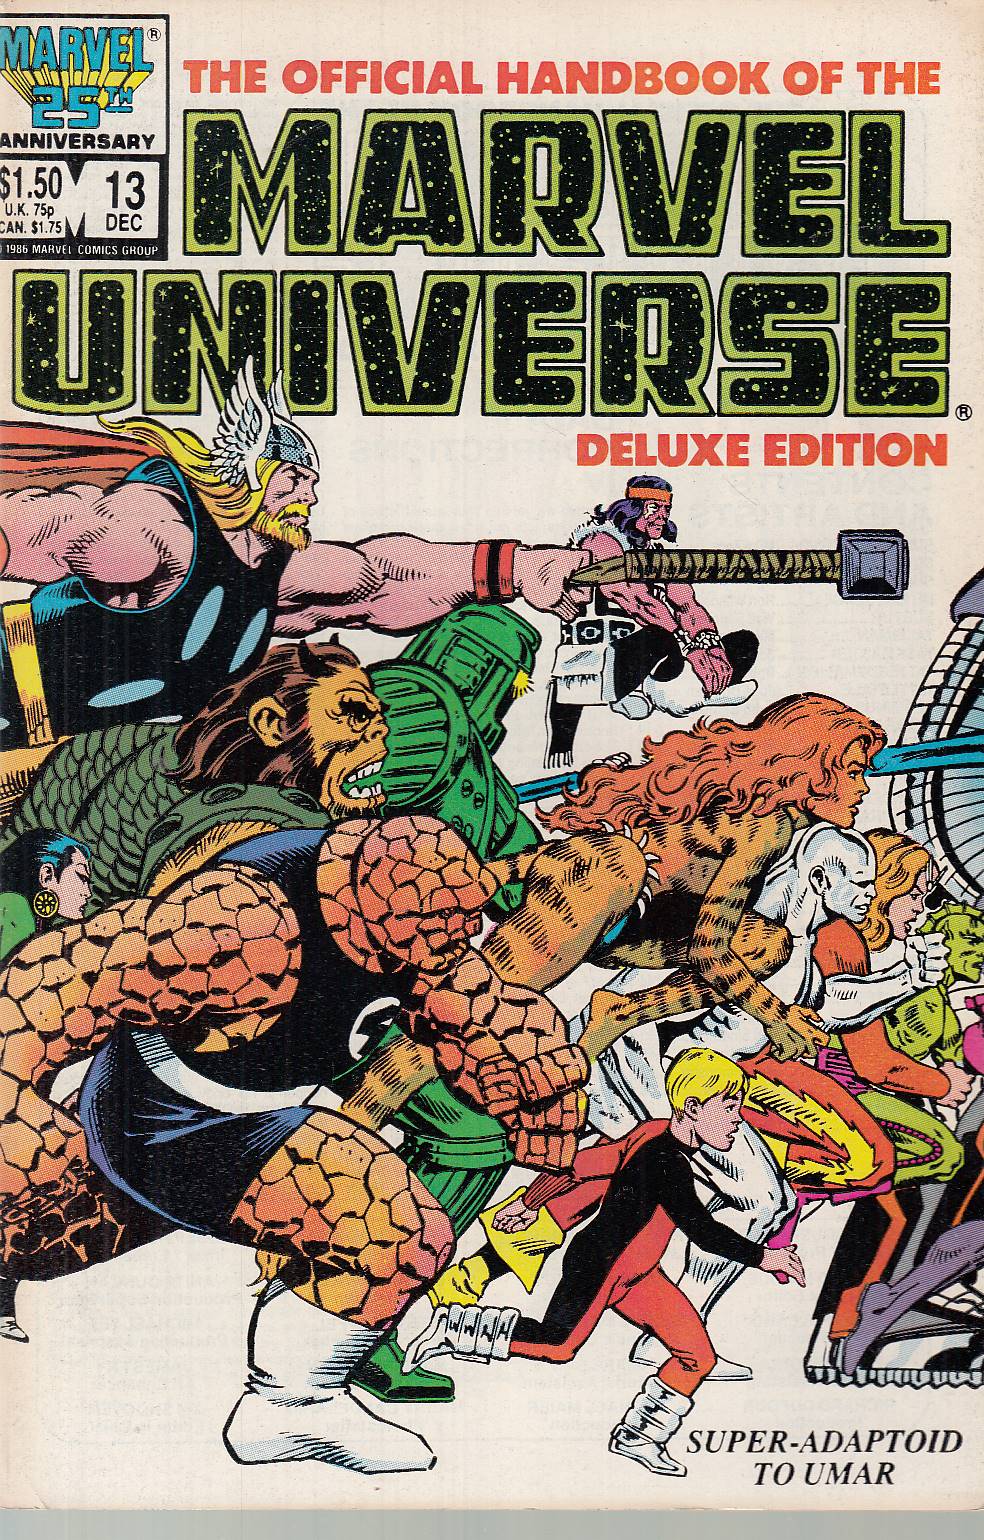 FL- MARVEL UNIVERSE N.13 DELUXE EDITION -- MARVEL COMICS USA - 1986 - S - NQX137